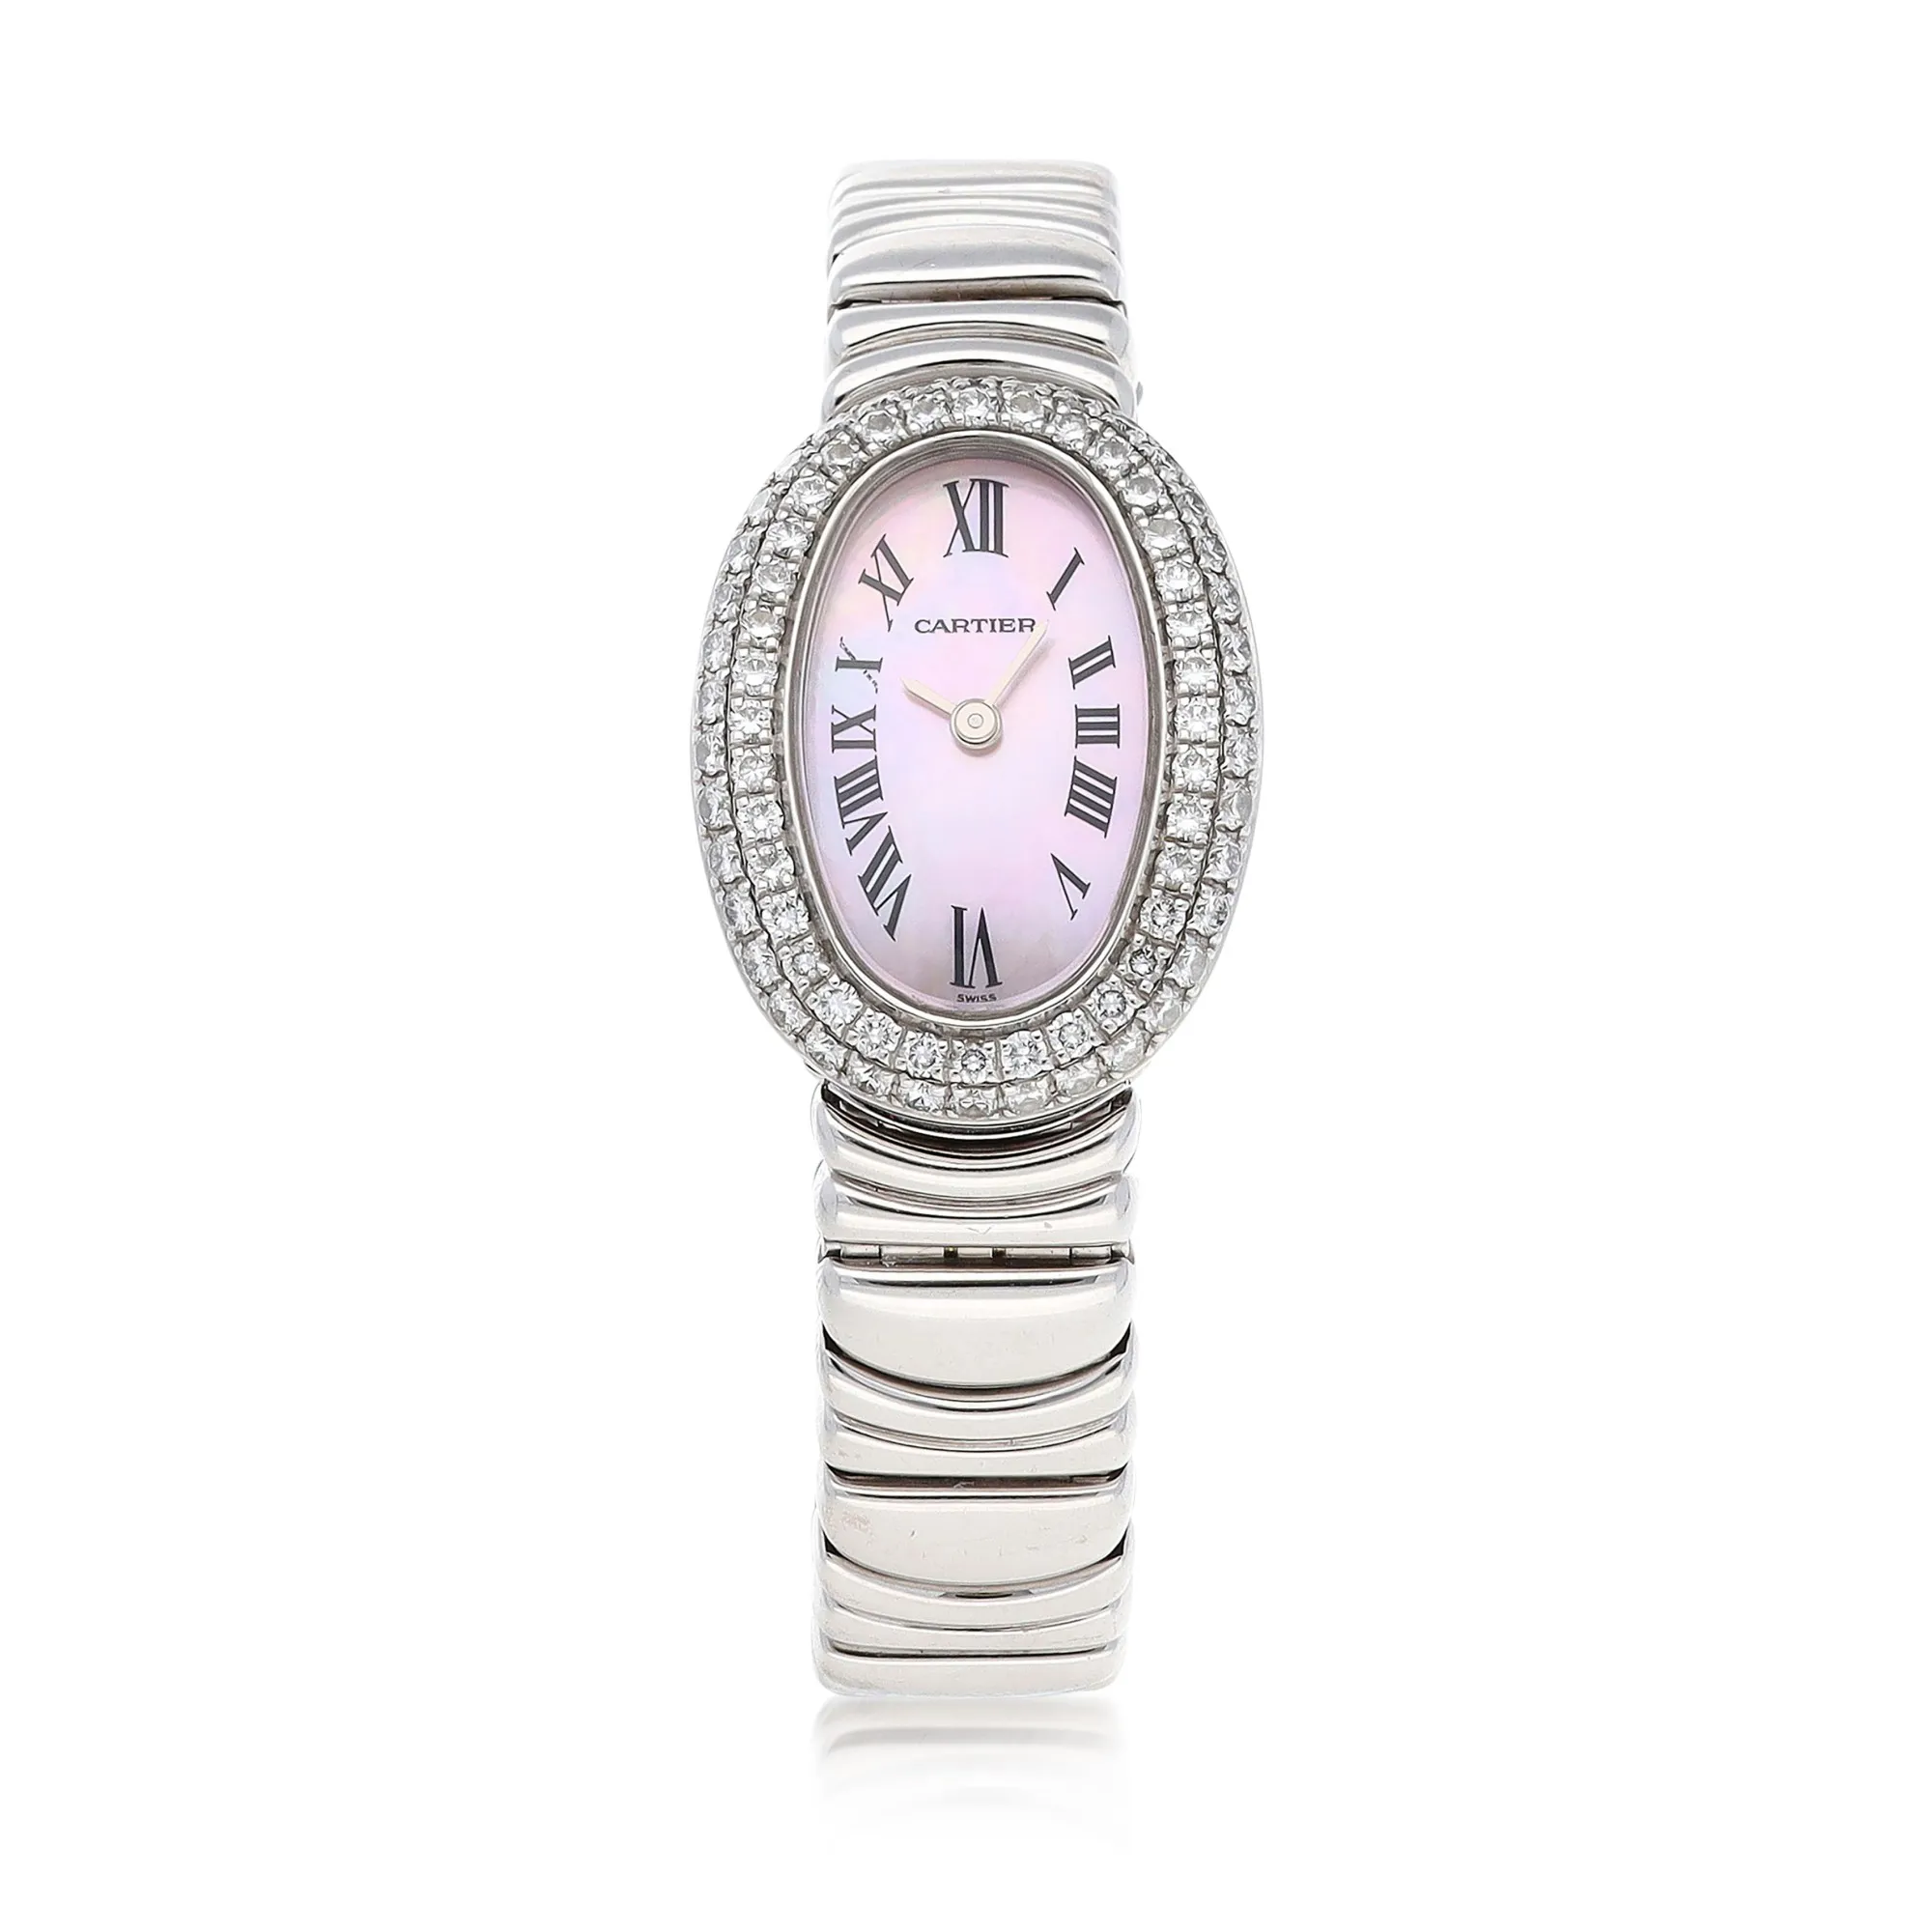 Cartier Baignoire Mini 2369 18mm White gold and diamond-set Mother-of-pearl